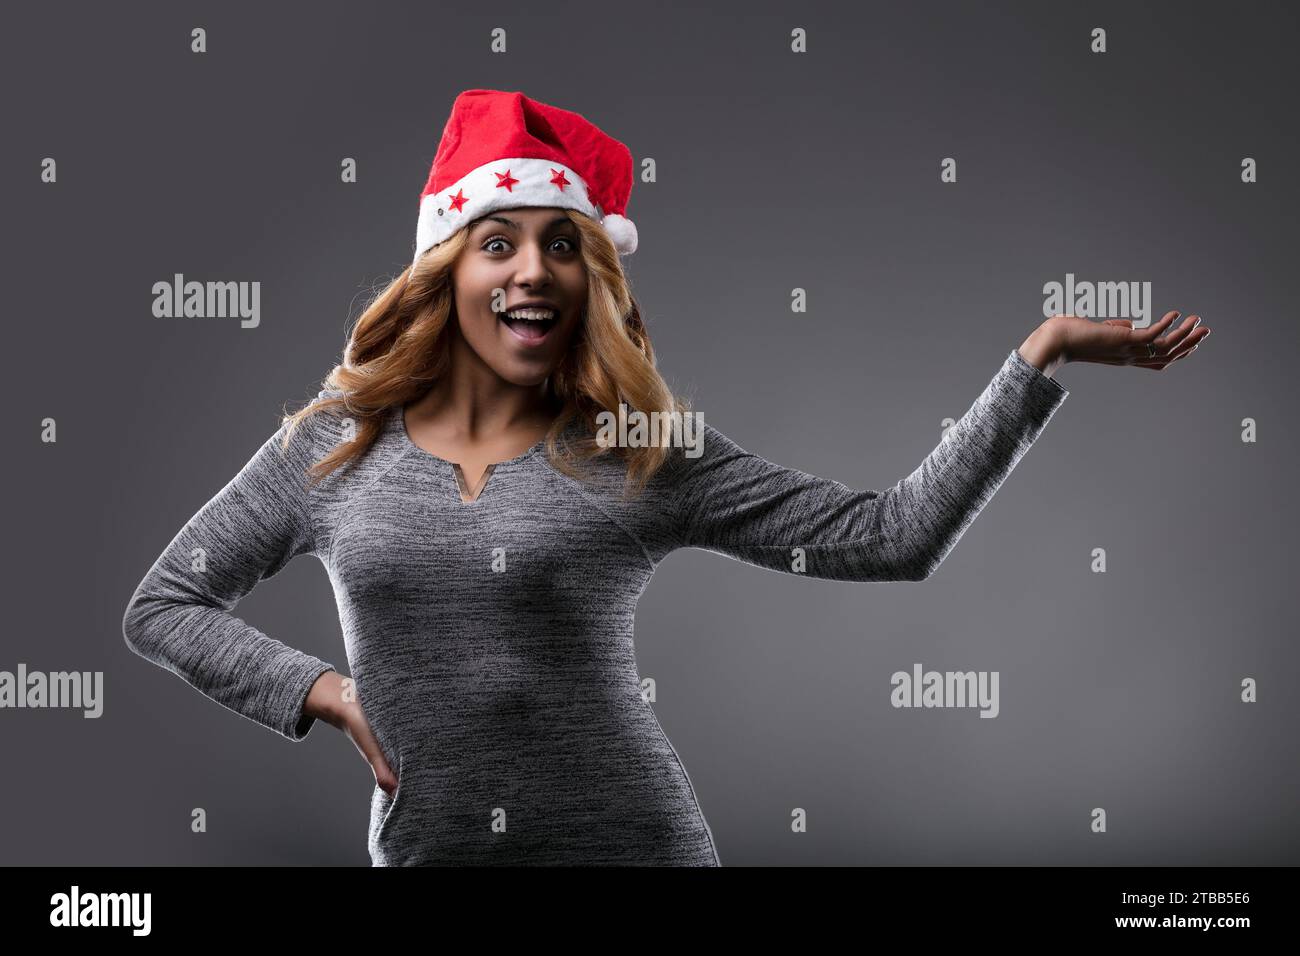 With a Santa hat and a gleeful smile, she embodies the cheer of the season as shows YOUR PRODUCT Stock Photo